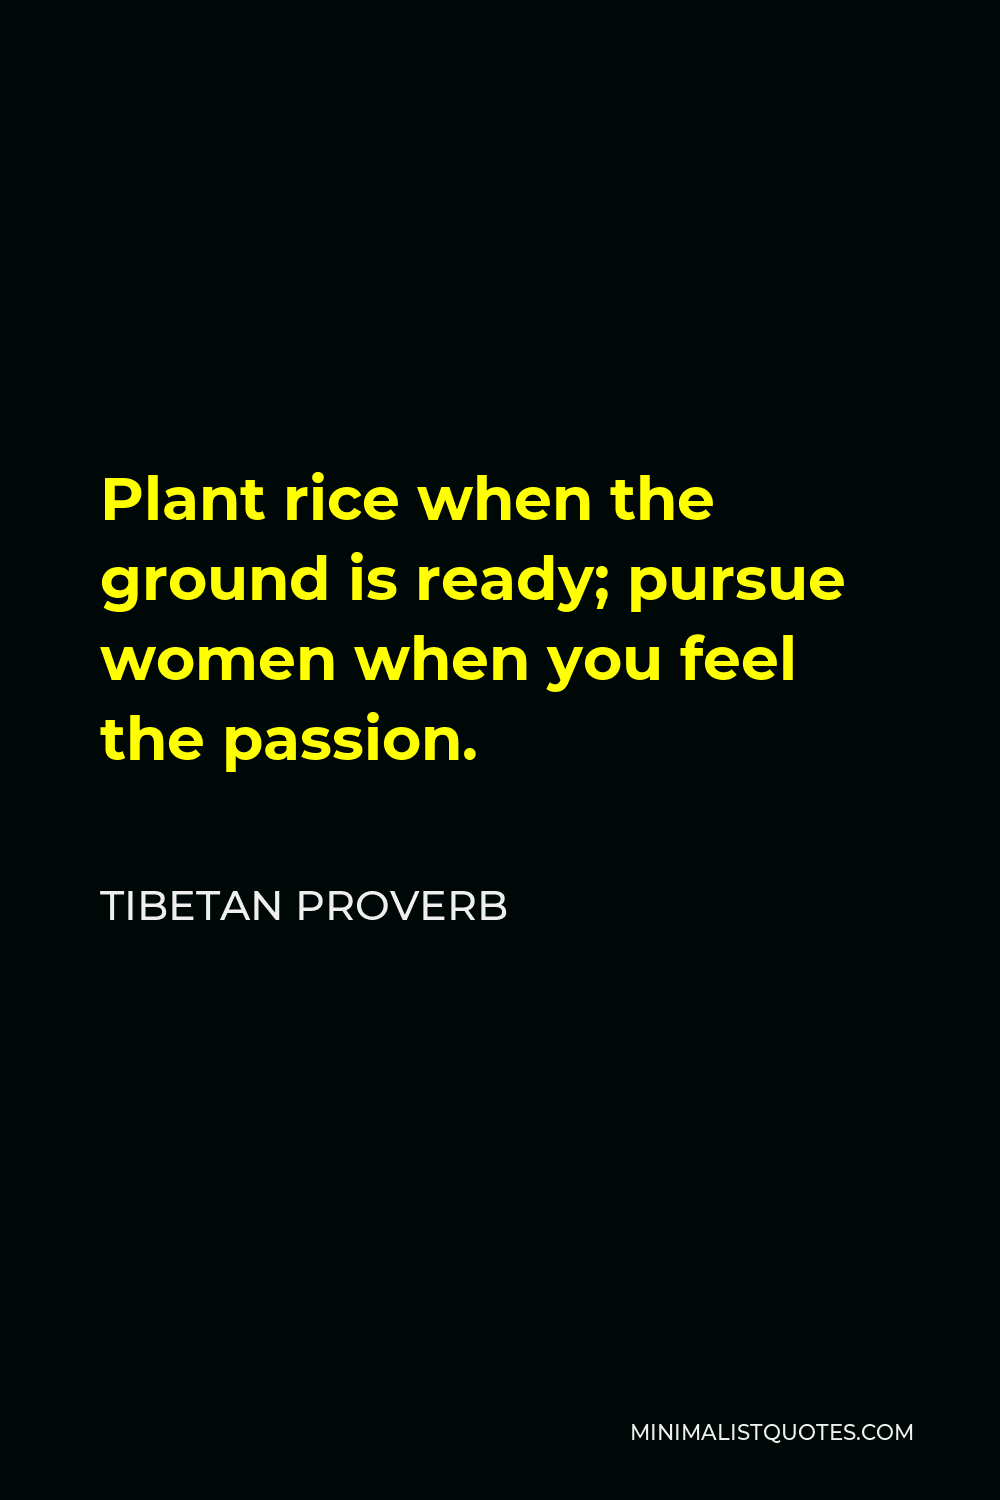 Tibetan Proverb Quote - Plant rice when the ground is ready; pursue women when you feel the passion.